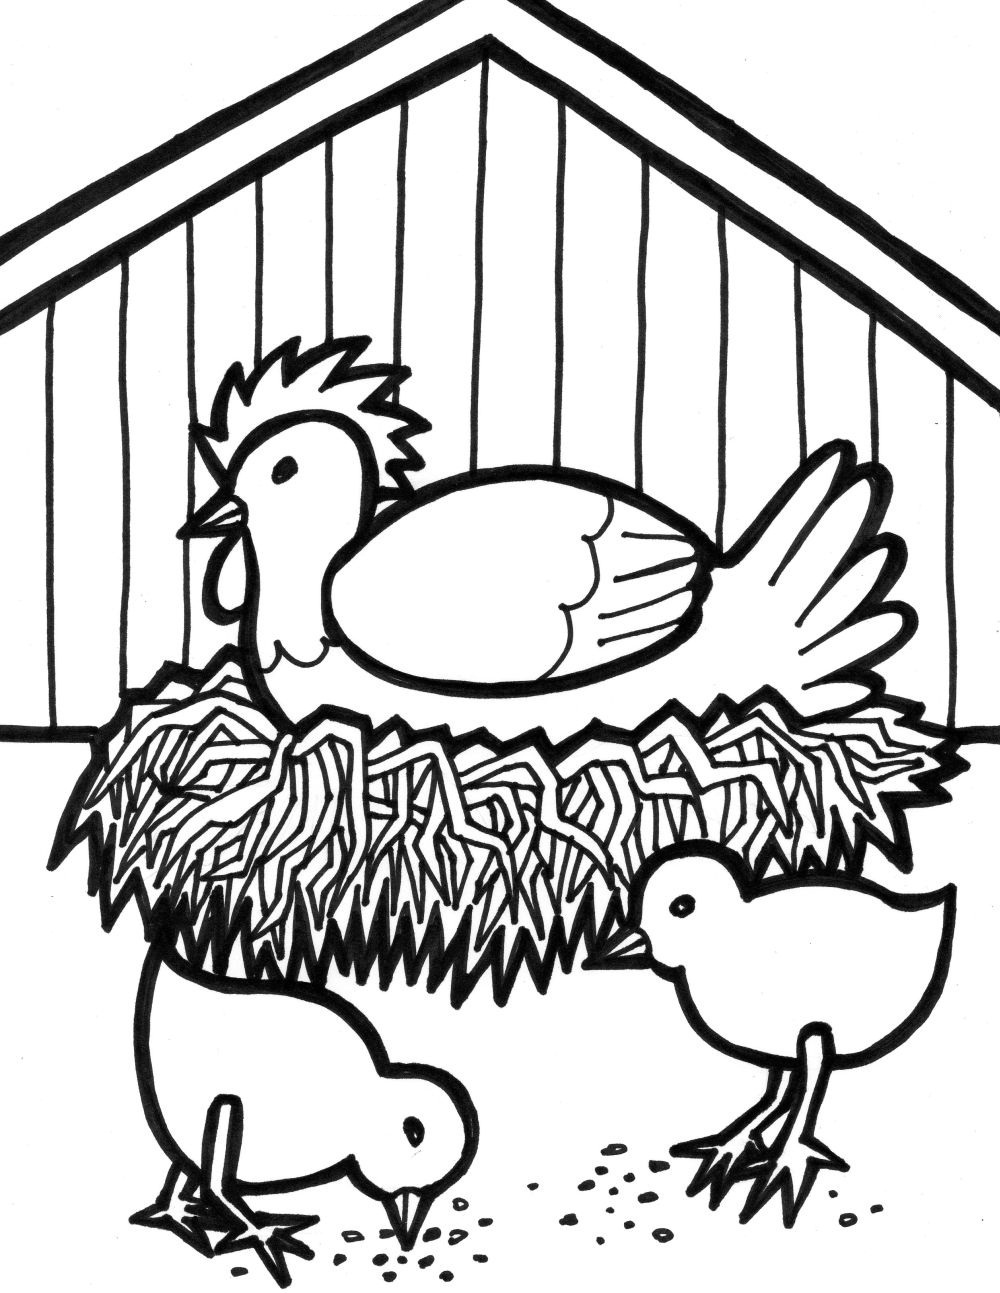 Coloring Pages of Farm Animals   Claresholm Museum